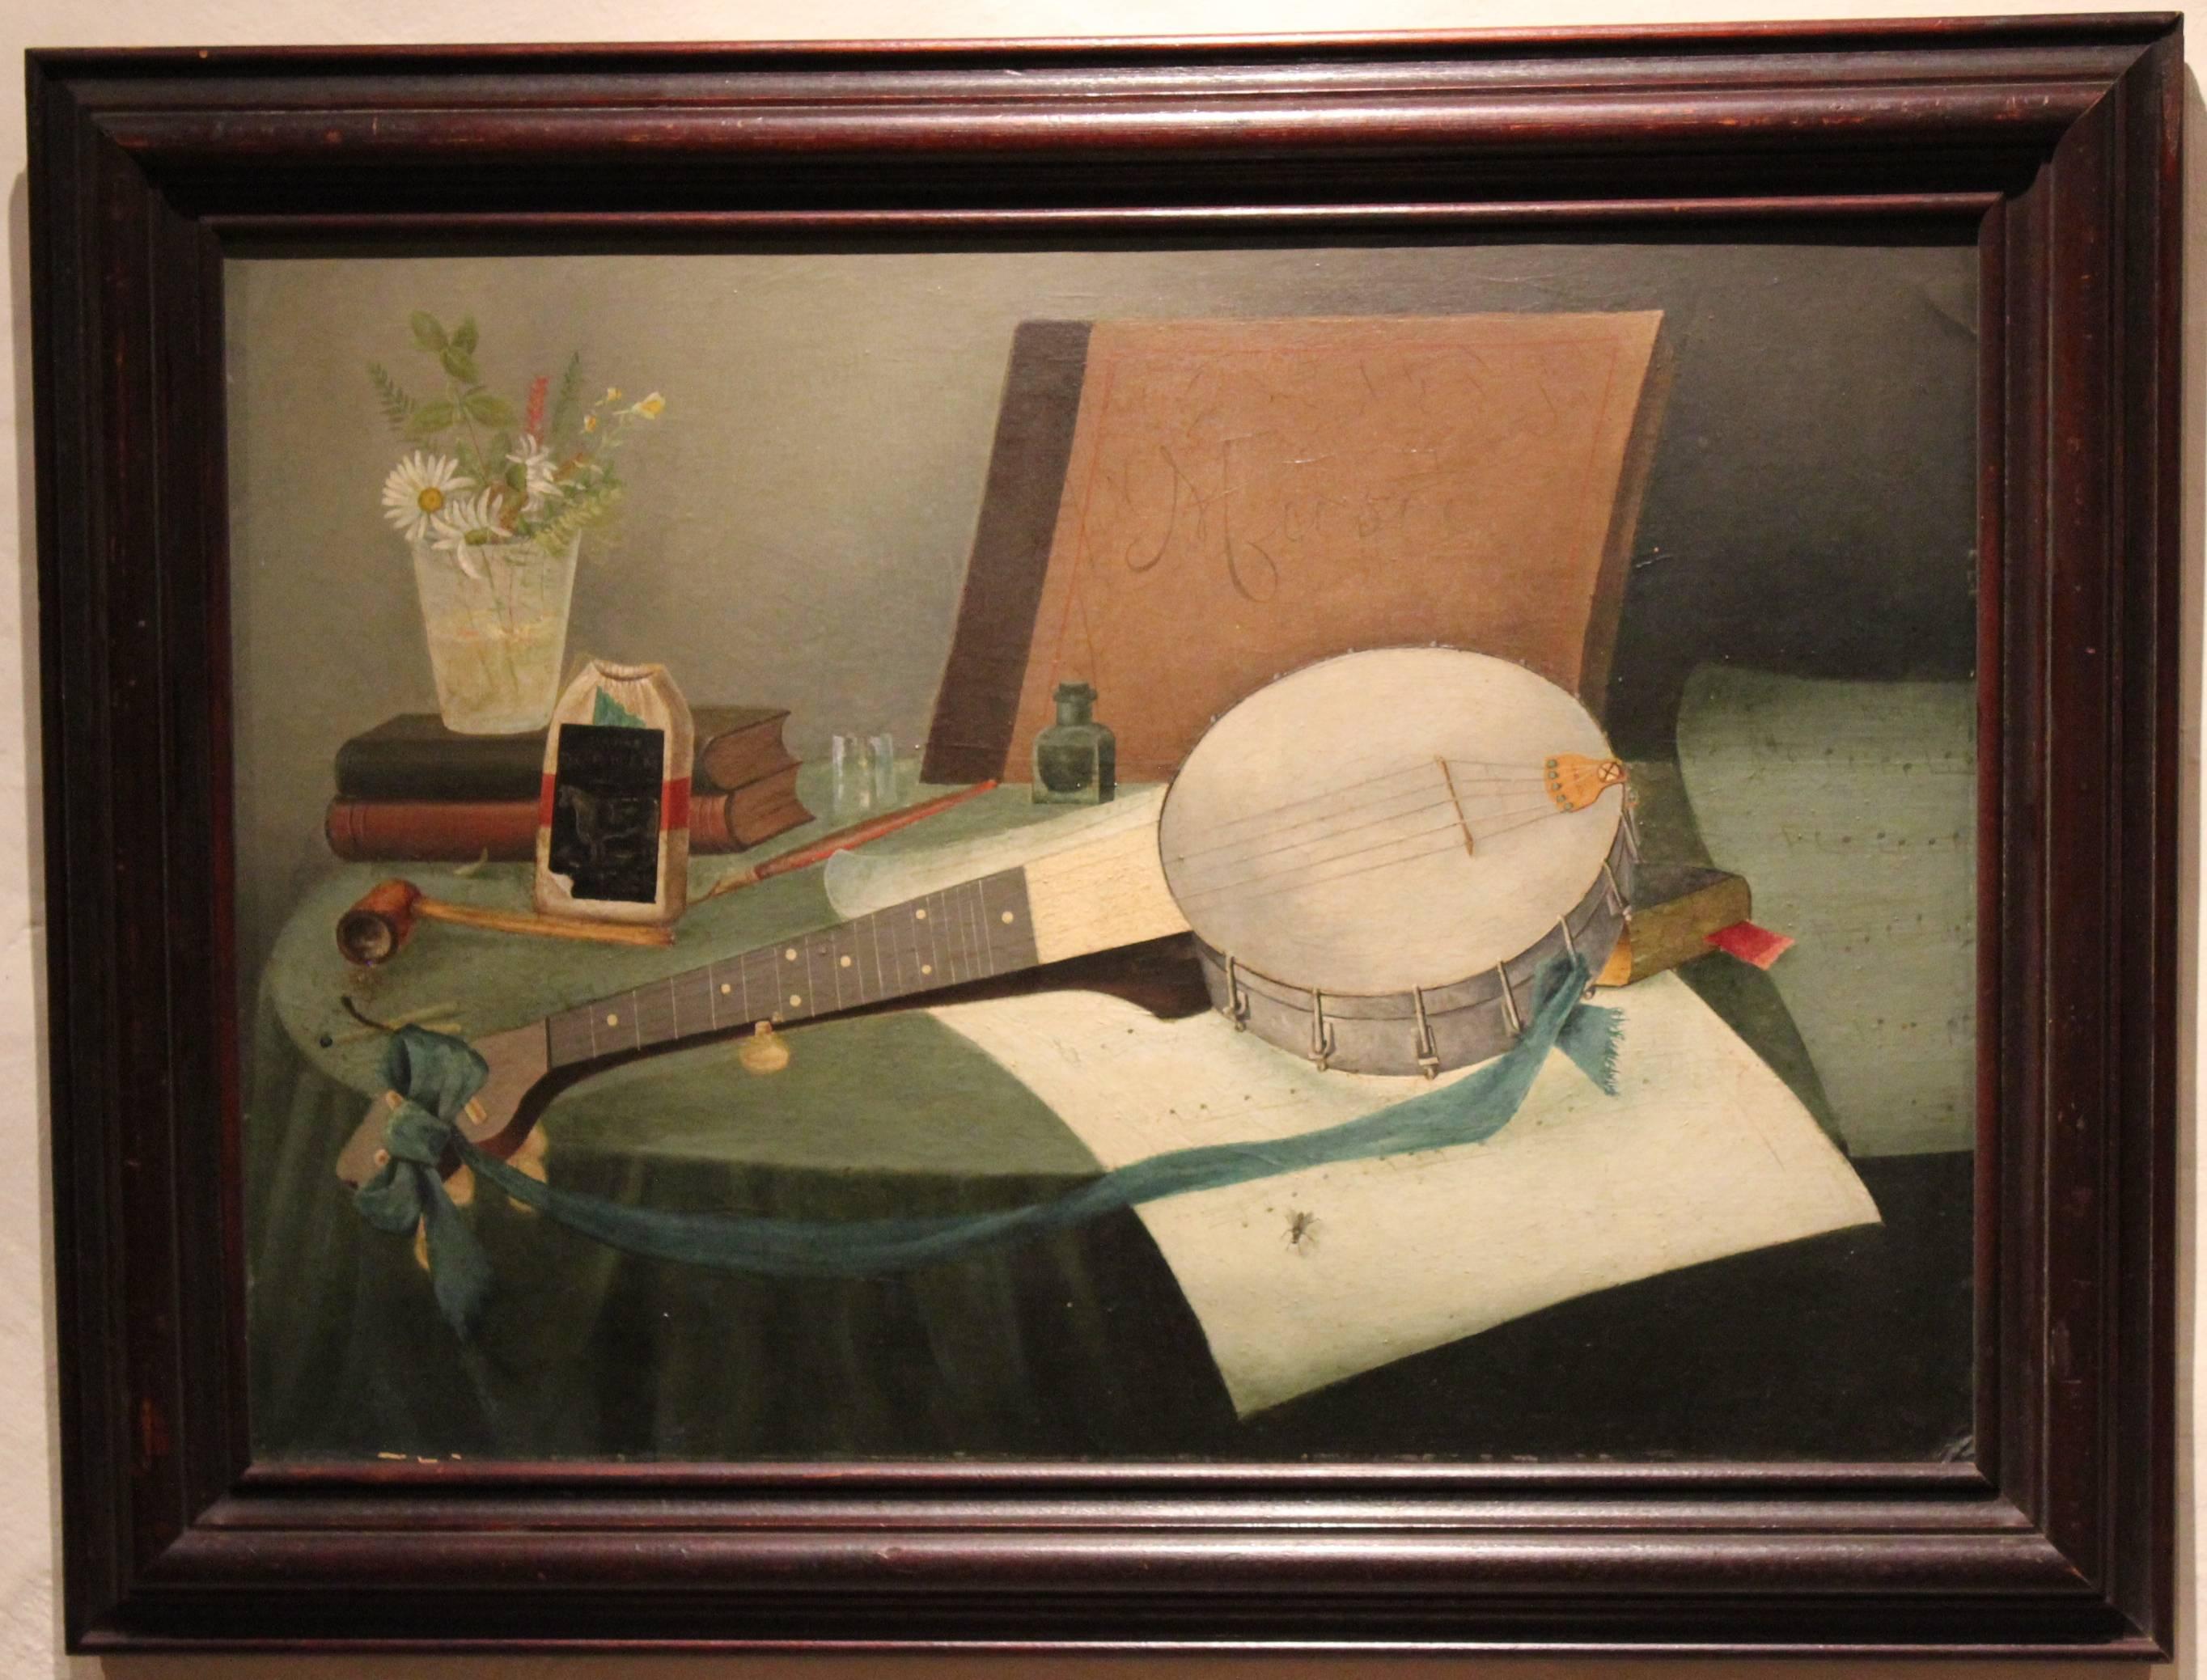 Still Life with Banjo
Artist unknown
American, last quarter of the 19th century
Oil on artist’s board, 18 ¾” x 25 ¾”; in a period walnut frame

A charming vignette that includes a music book, vase of flowers, a pouch of chewing tobacco, pipe,